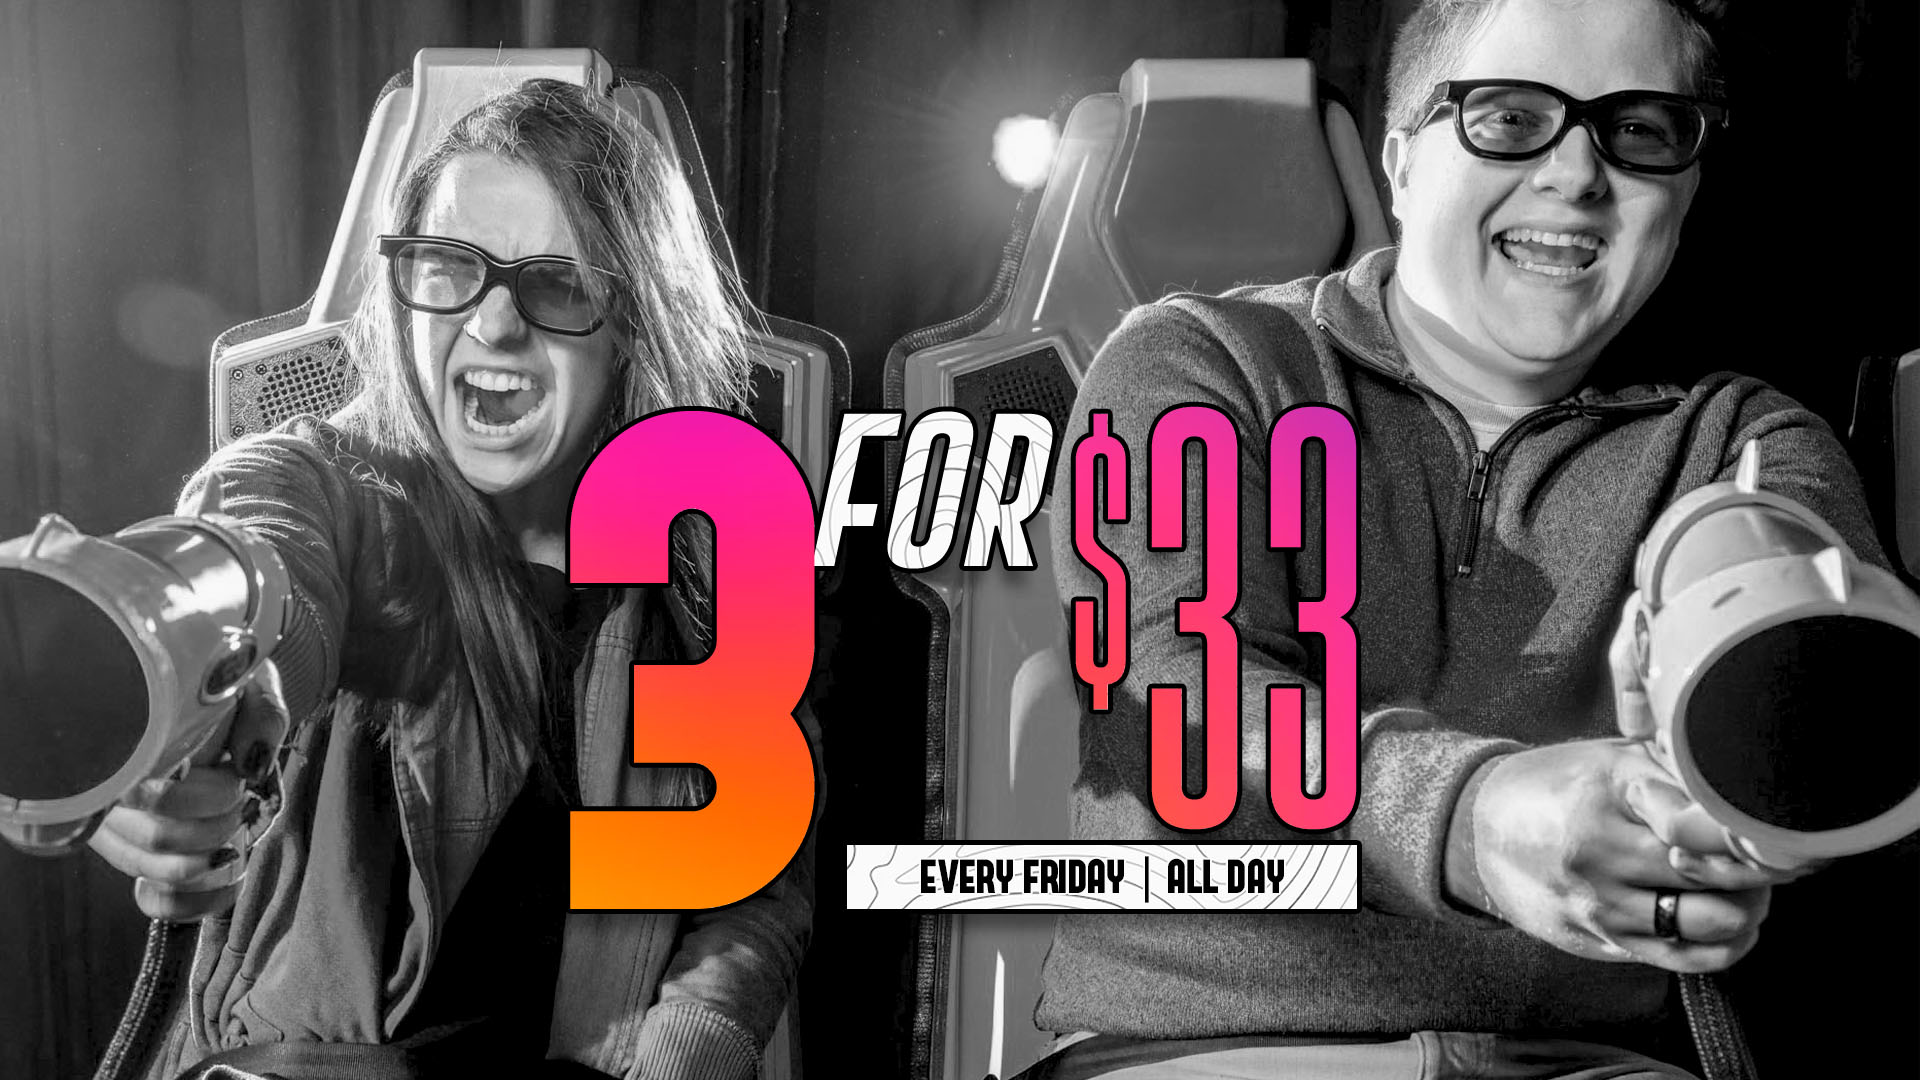 Get 3 activities for $33 every Friday at Xtreme Action Park